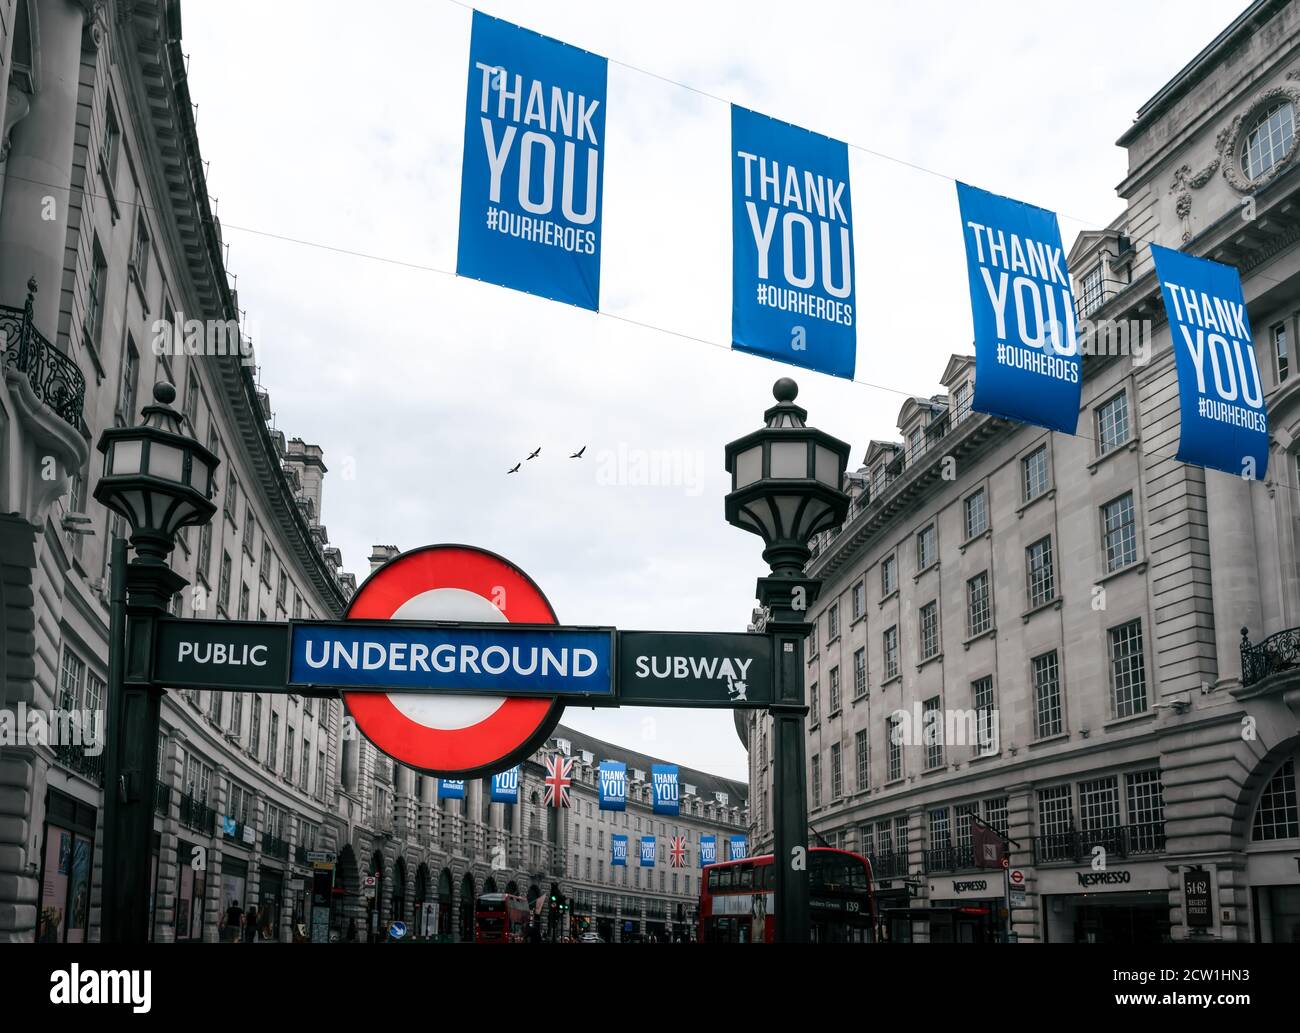 London - 08 August 2020 - Piccadilly Underground Tube Station Sign with NHS Thank You Banners Post Lockdown in London, UK Stock Photo